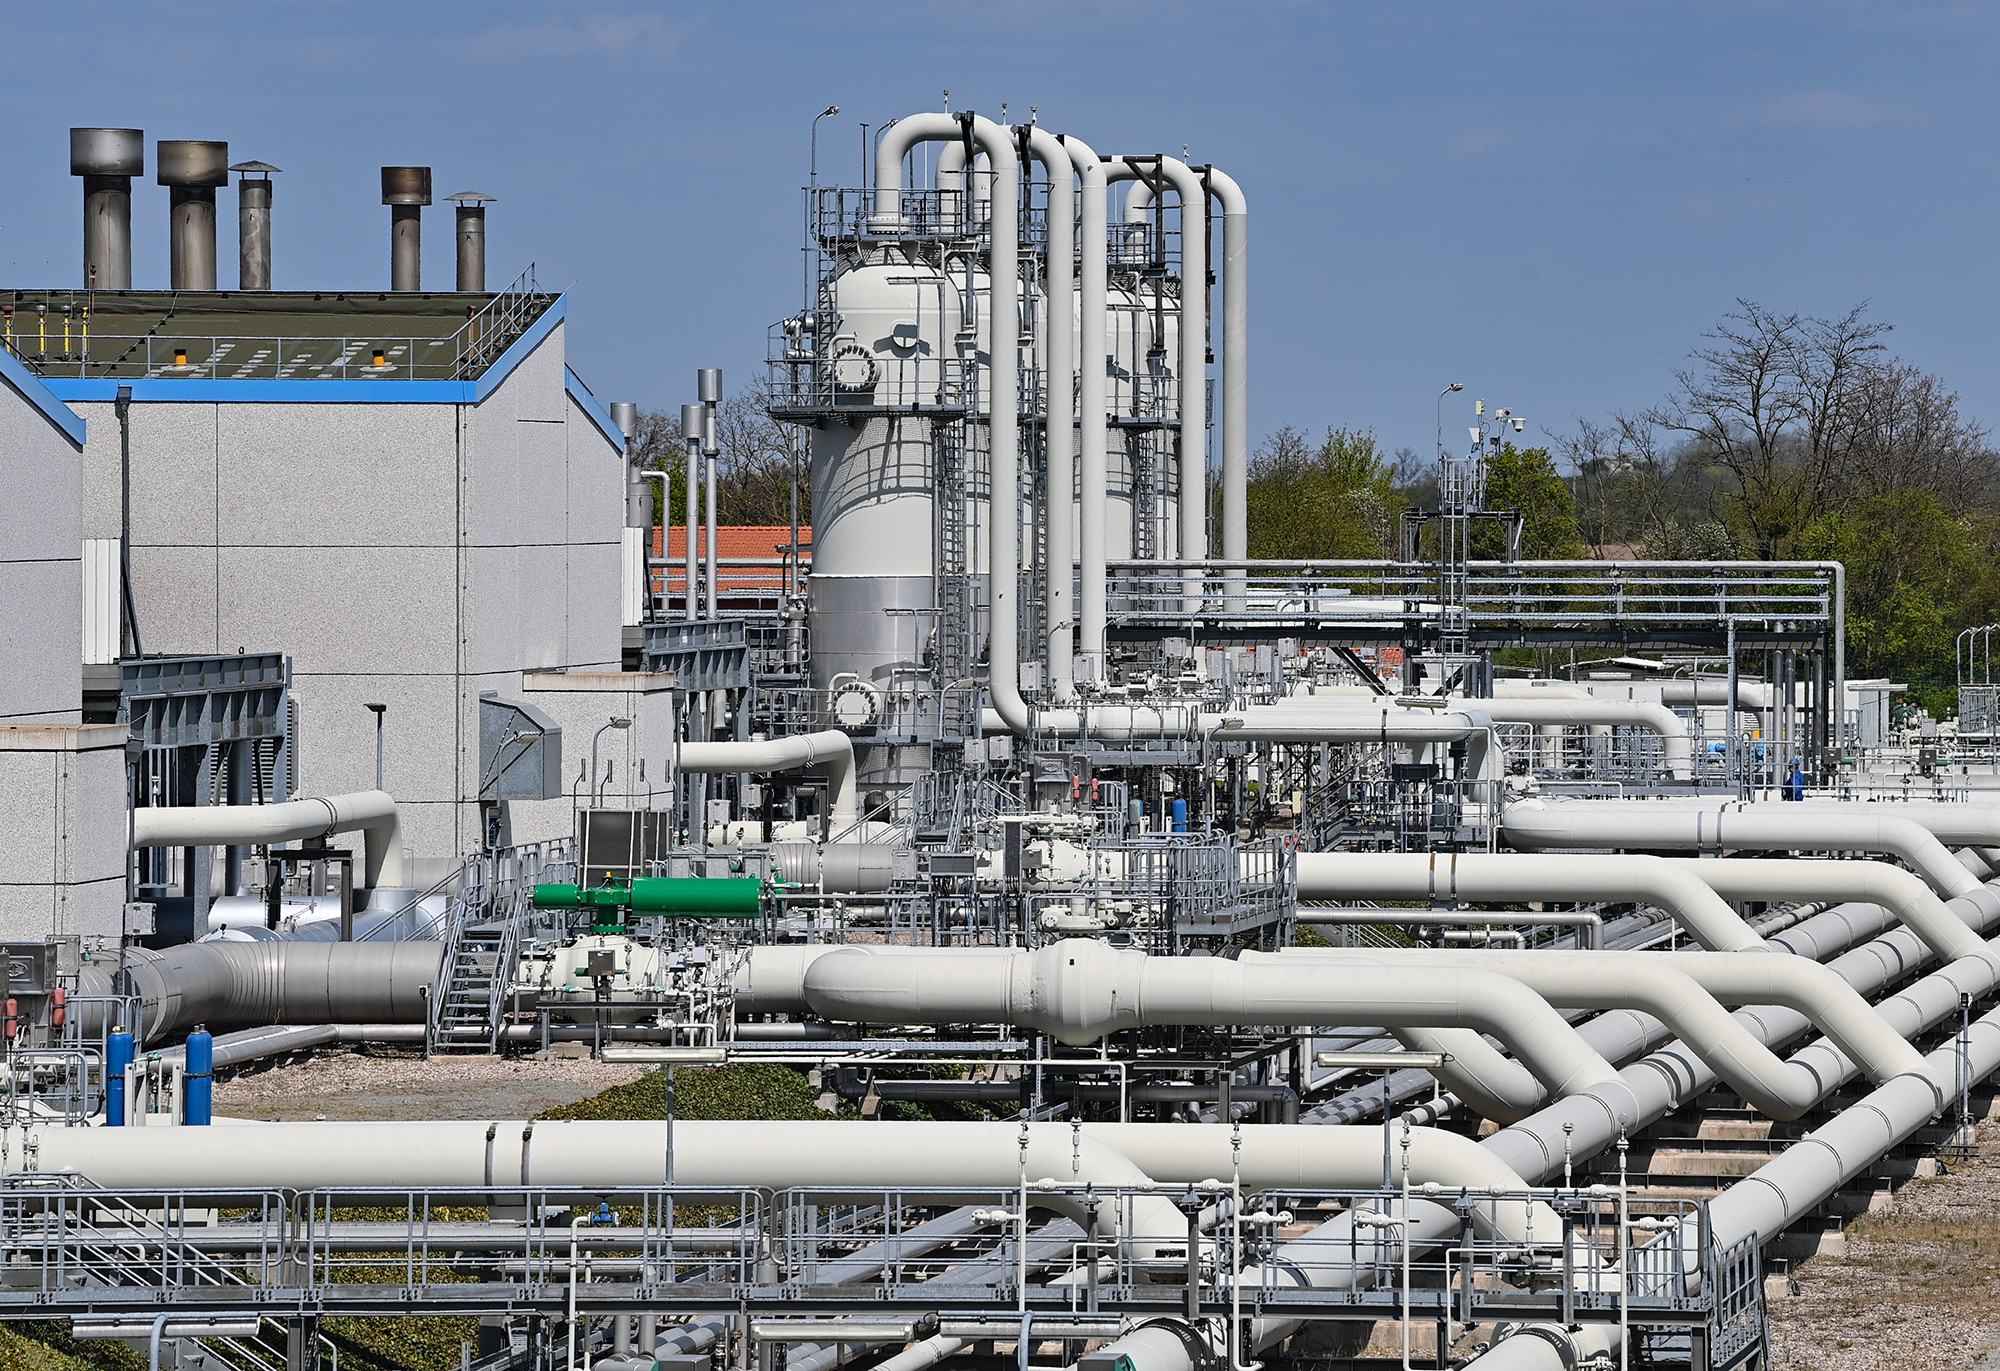 The Mallnow natural gas compressor station of Gascade Gastransport GmbH on April 27. The compressor station in Mallnow near the German-Polish border mainly receives Russian natural gas. 